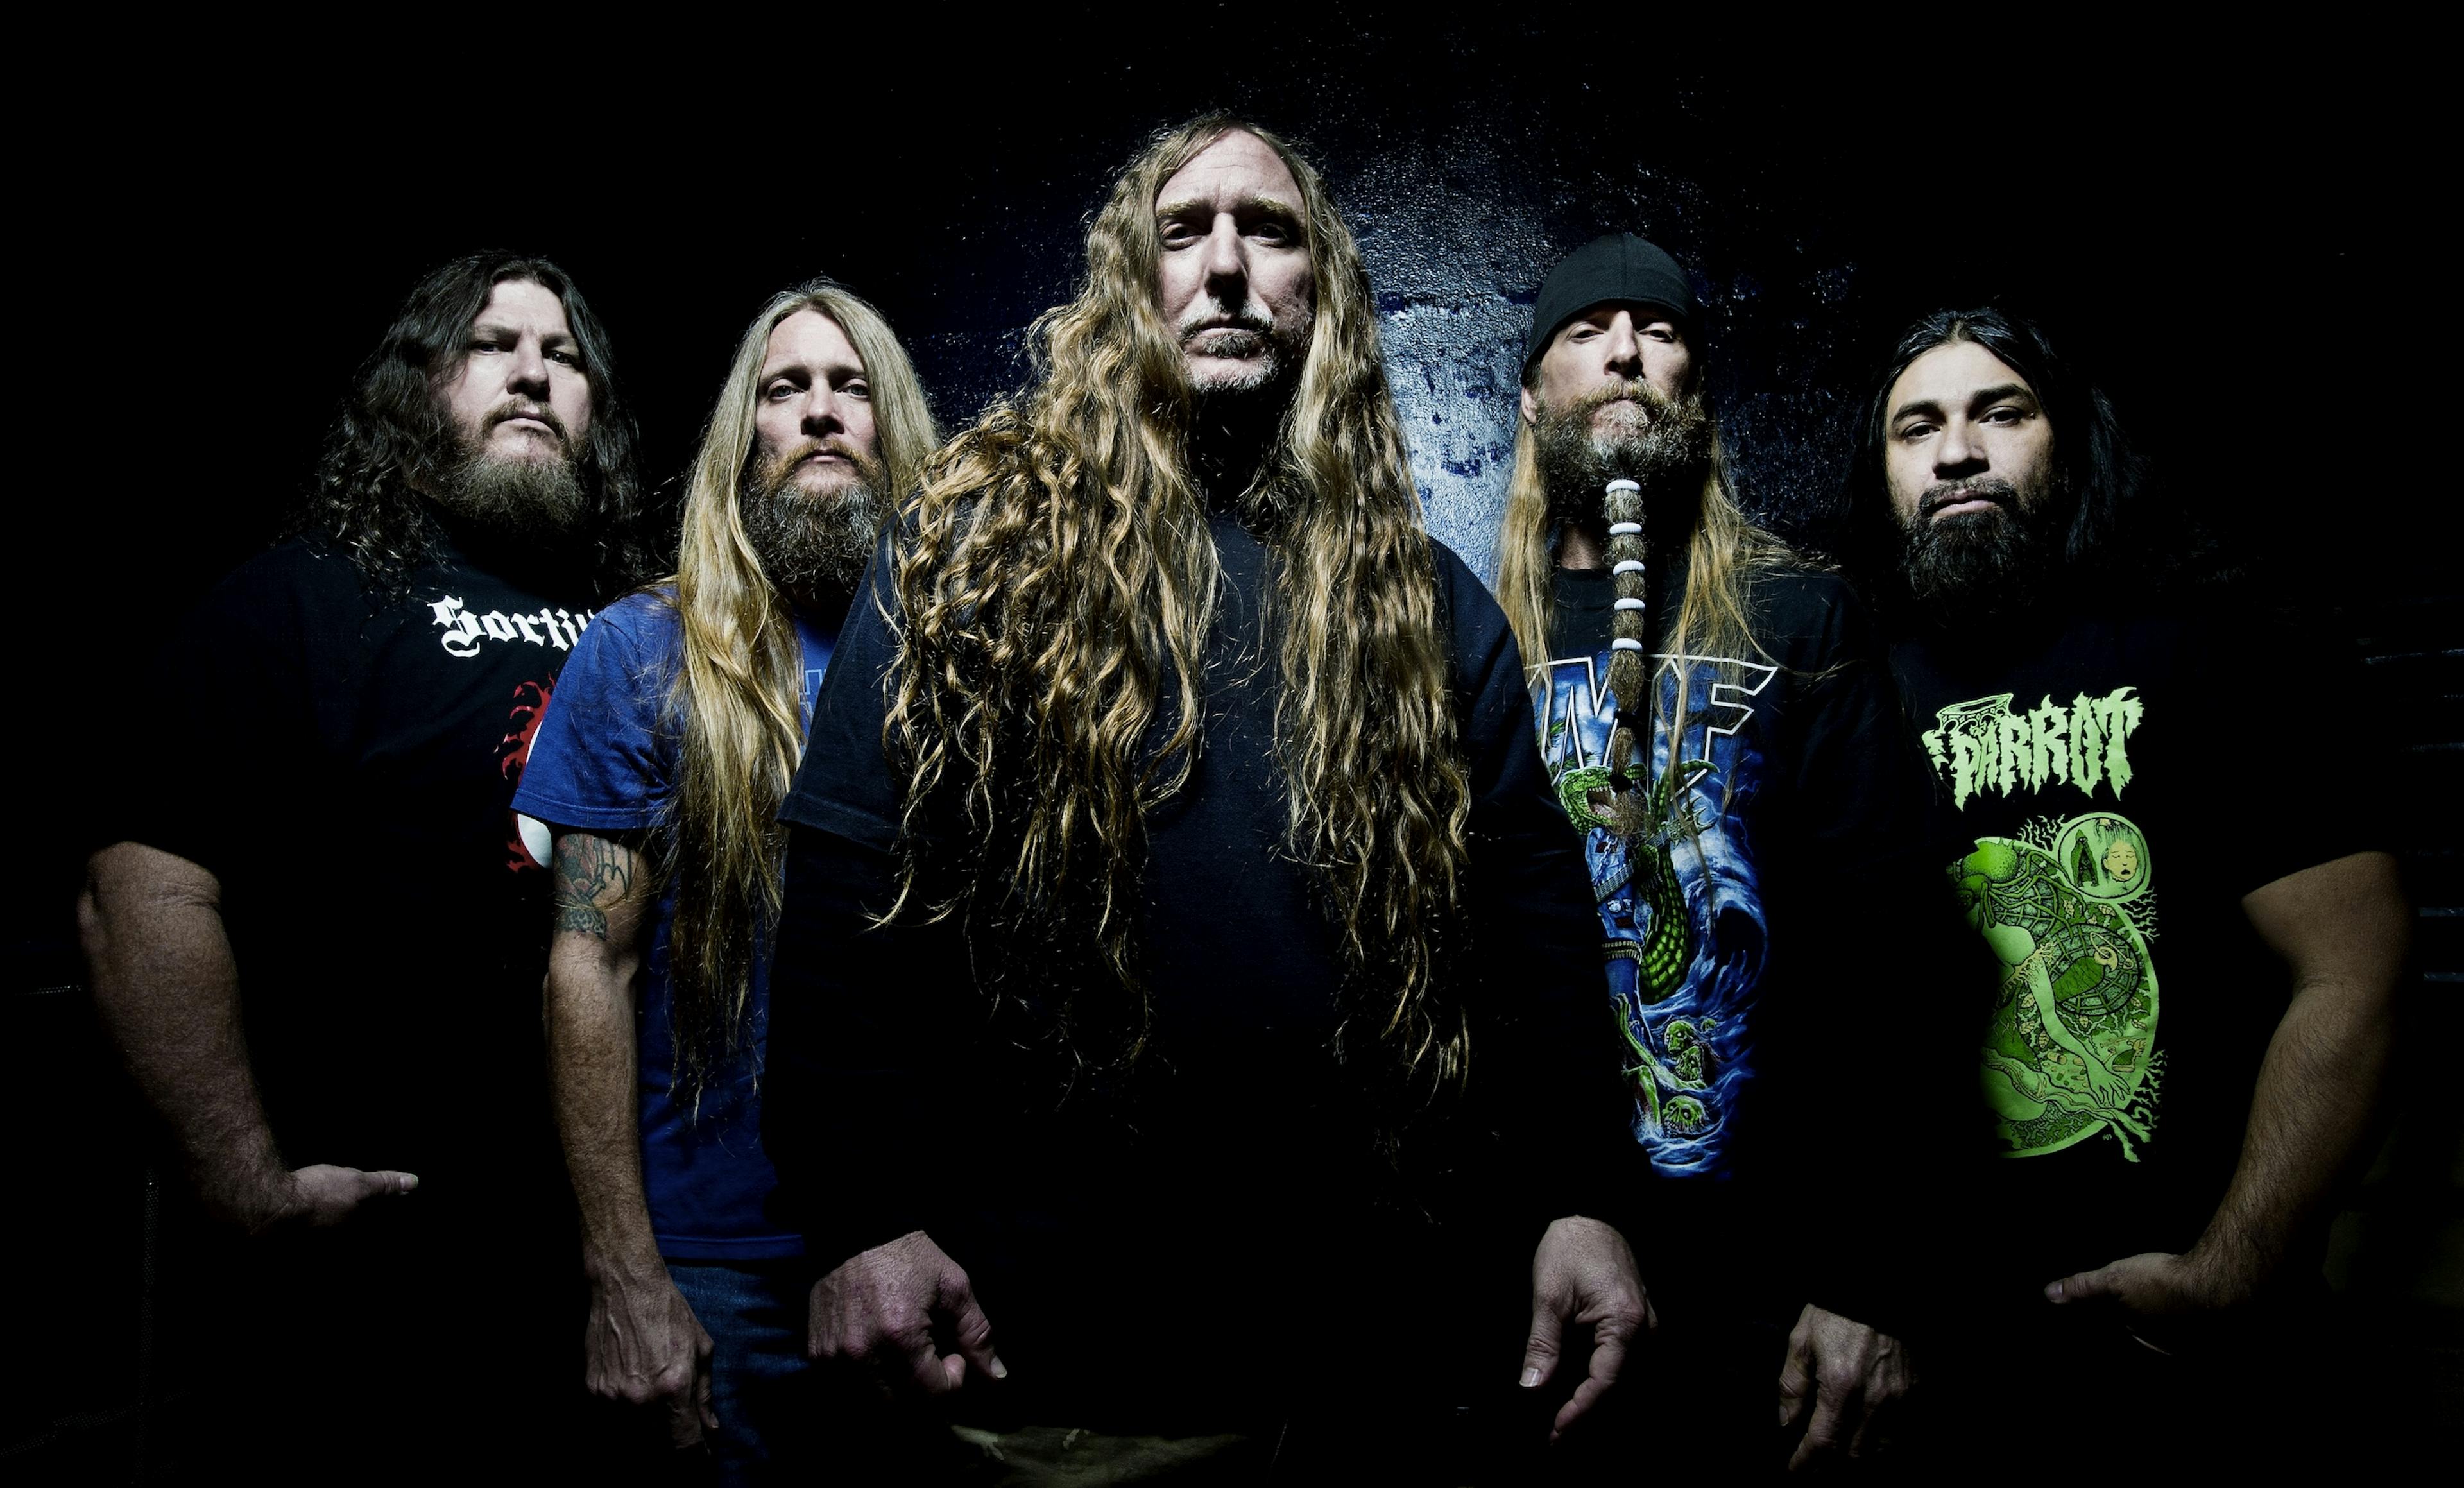 Win Two Free Tickets To See Obituary on Tour in the U.S.!